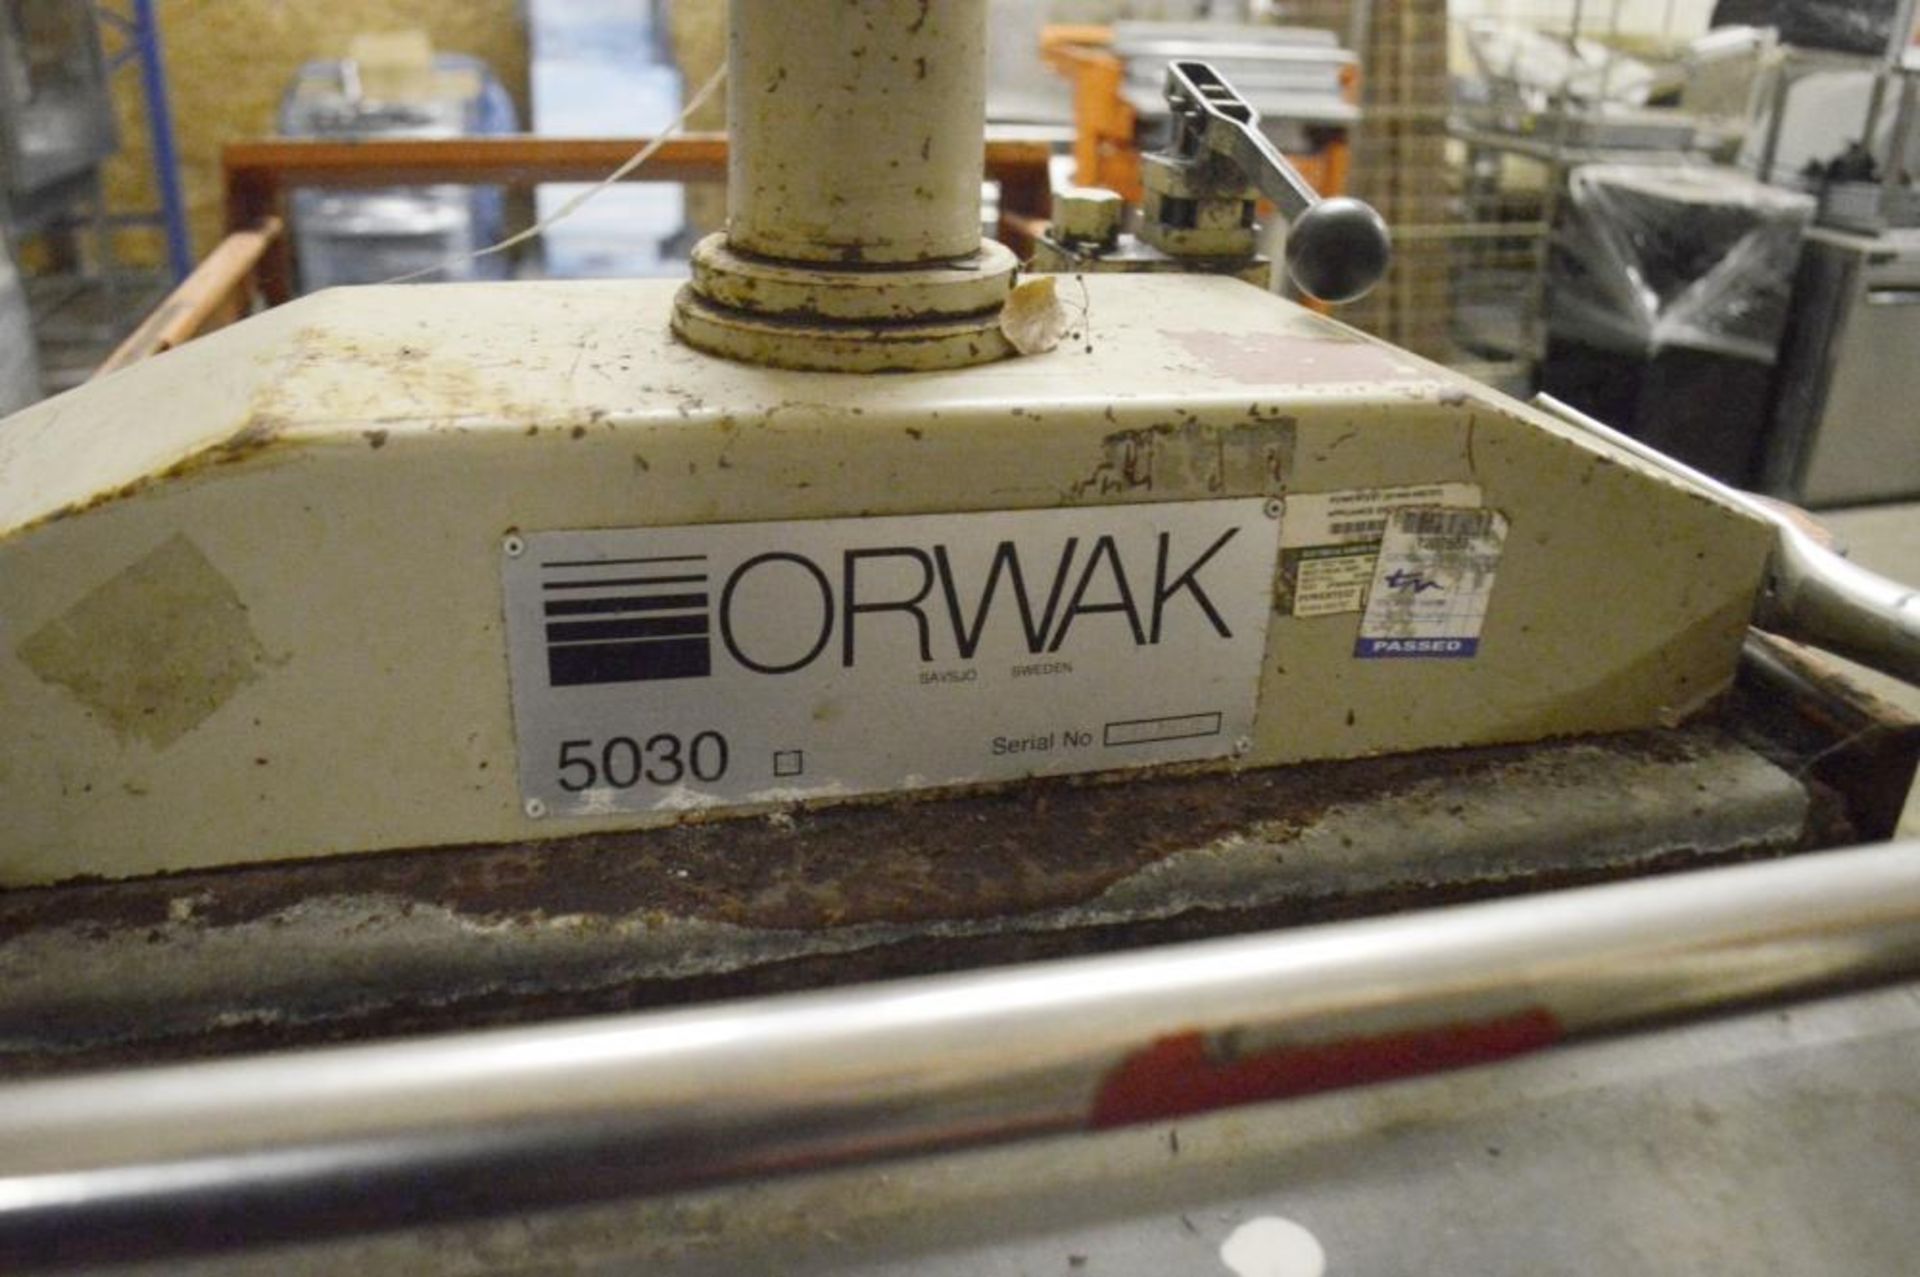 1 x Orwak 5030 Waste Compactor - Used For Compacting Recyclable or Non-Recyclable Waste - Red - Image 6 of 6